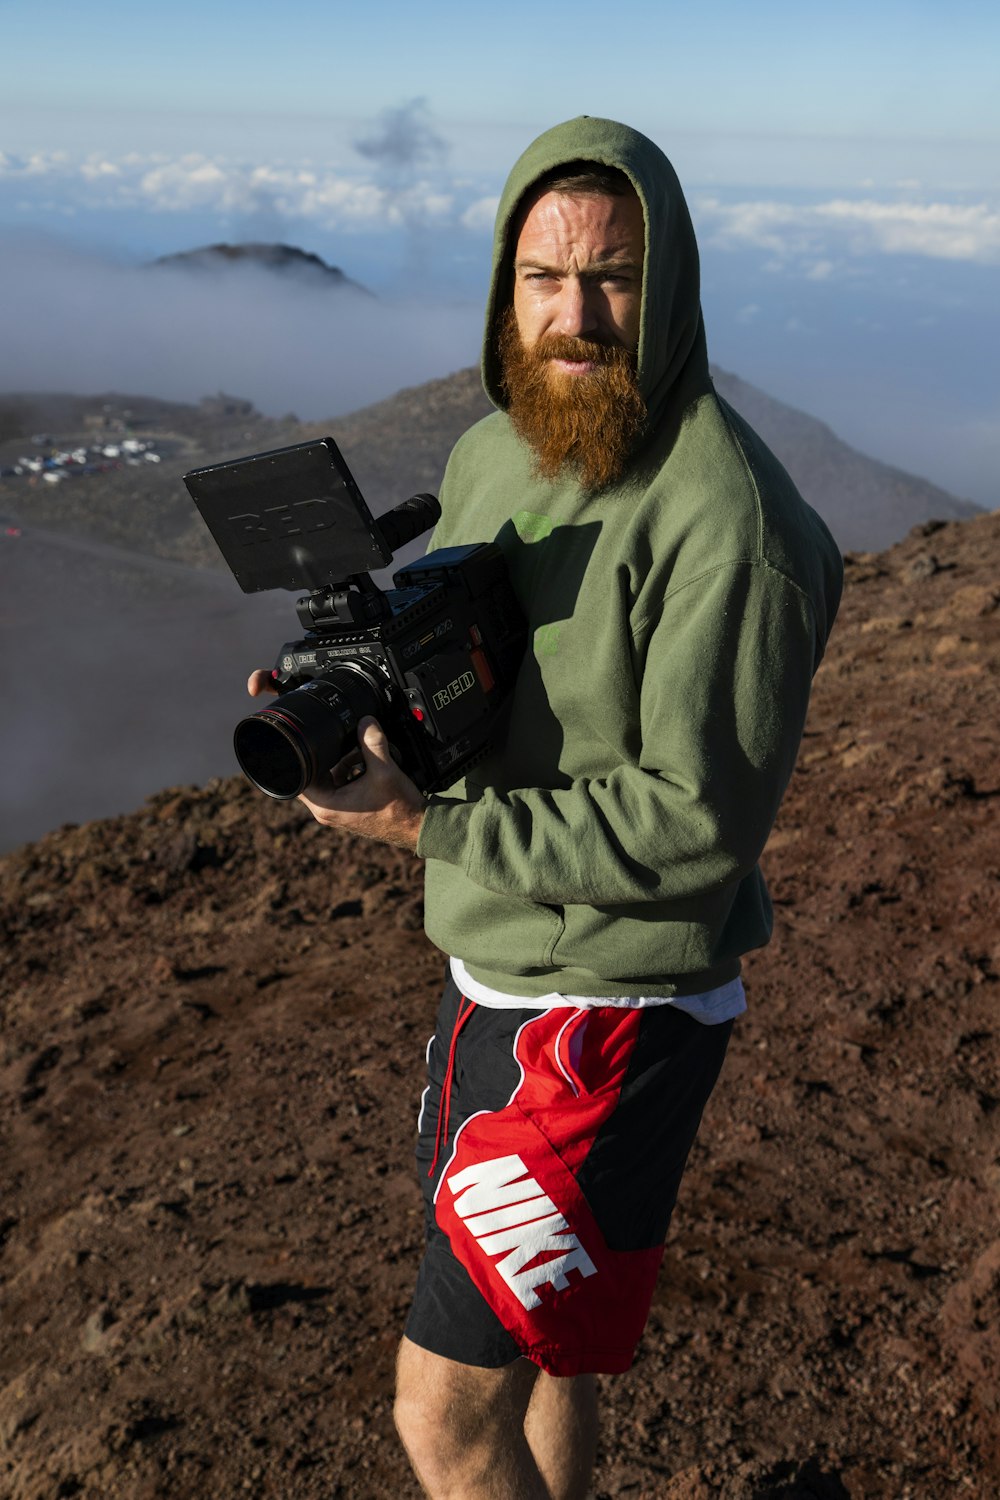 man standing on top of mountain while holding video camera